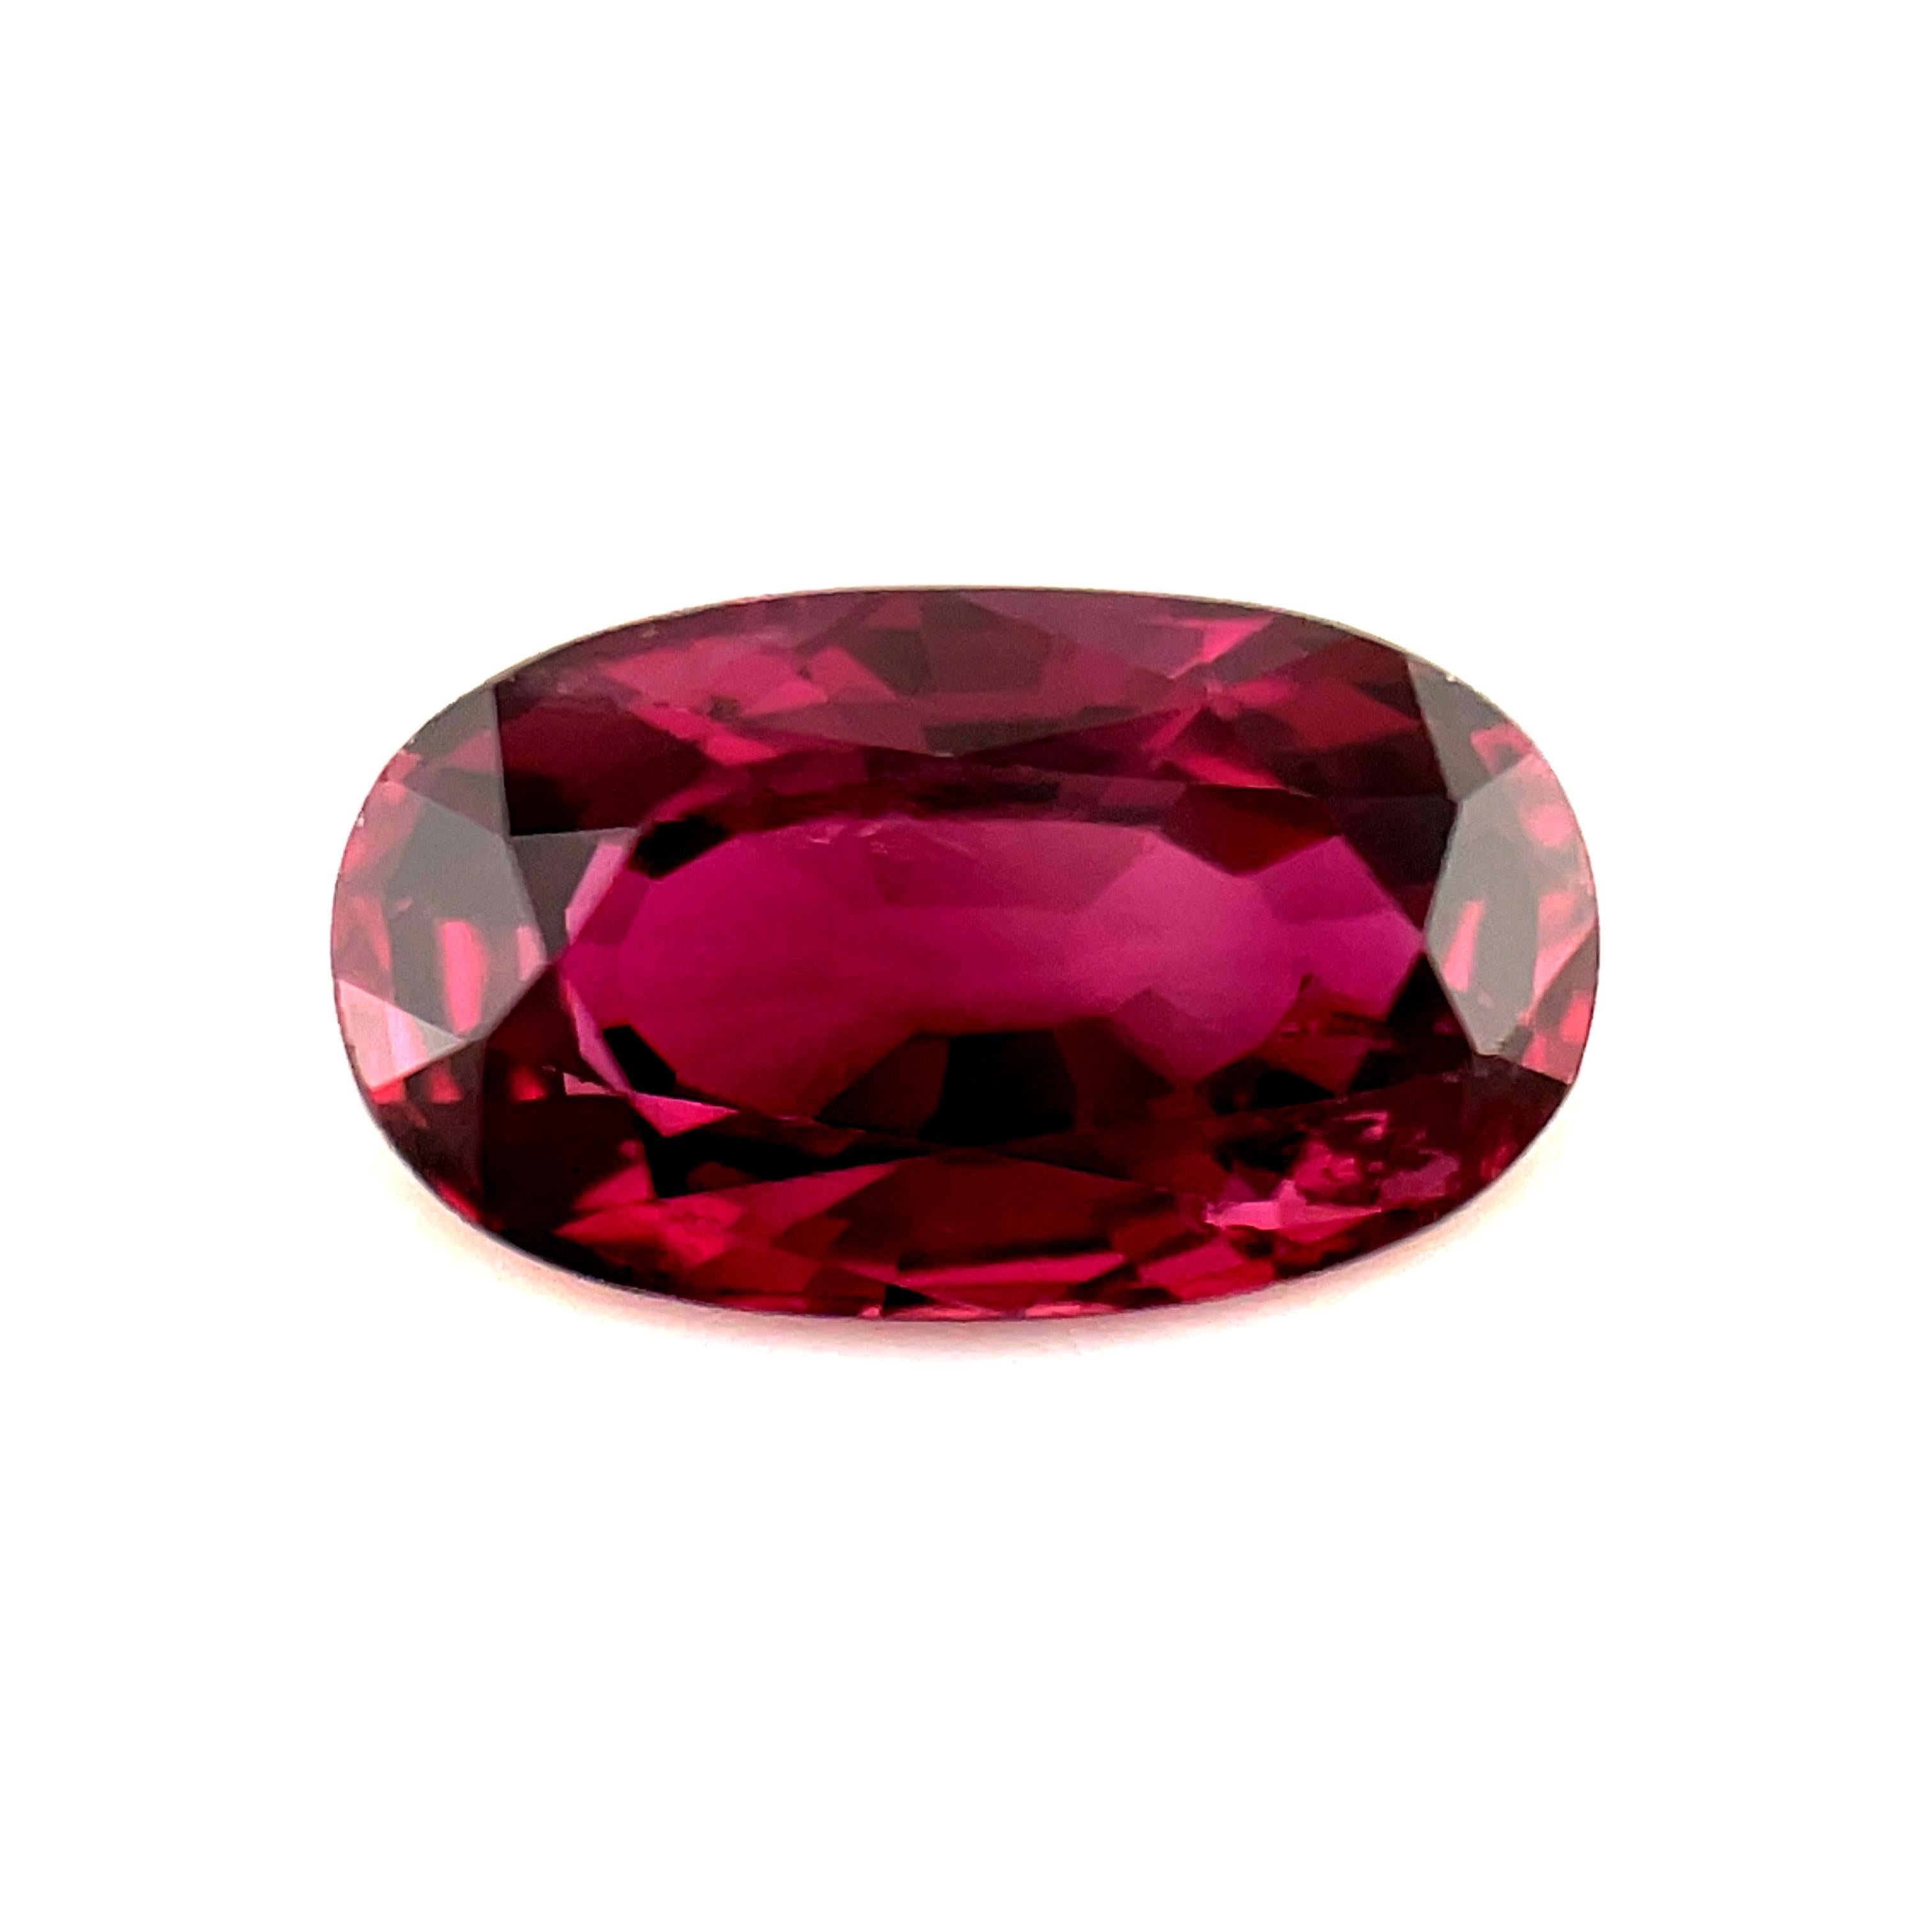 Oval Cut Loose Ruby Gemstone for Engagement or 3-Stone Ring, 1.46 Carat Oval  For Sale